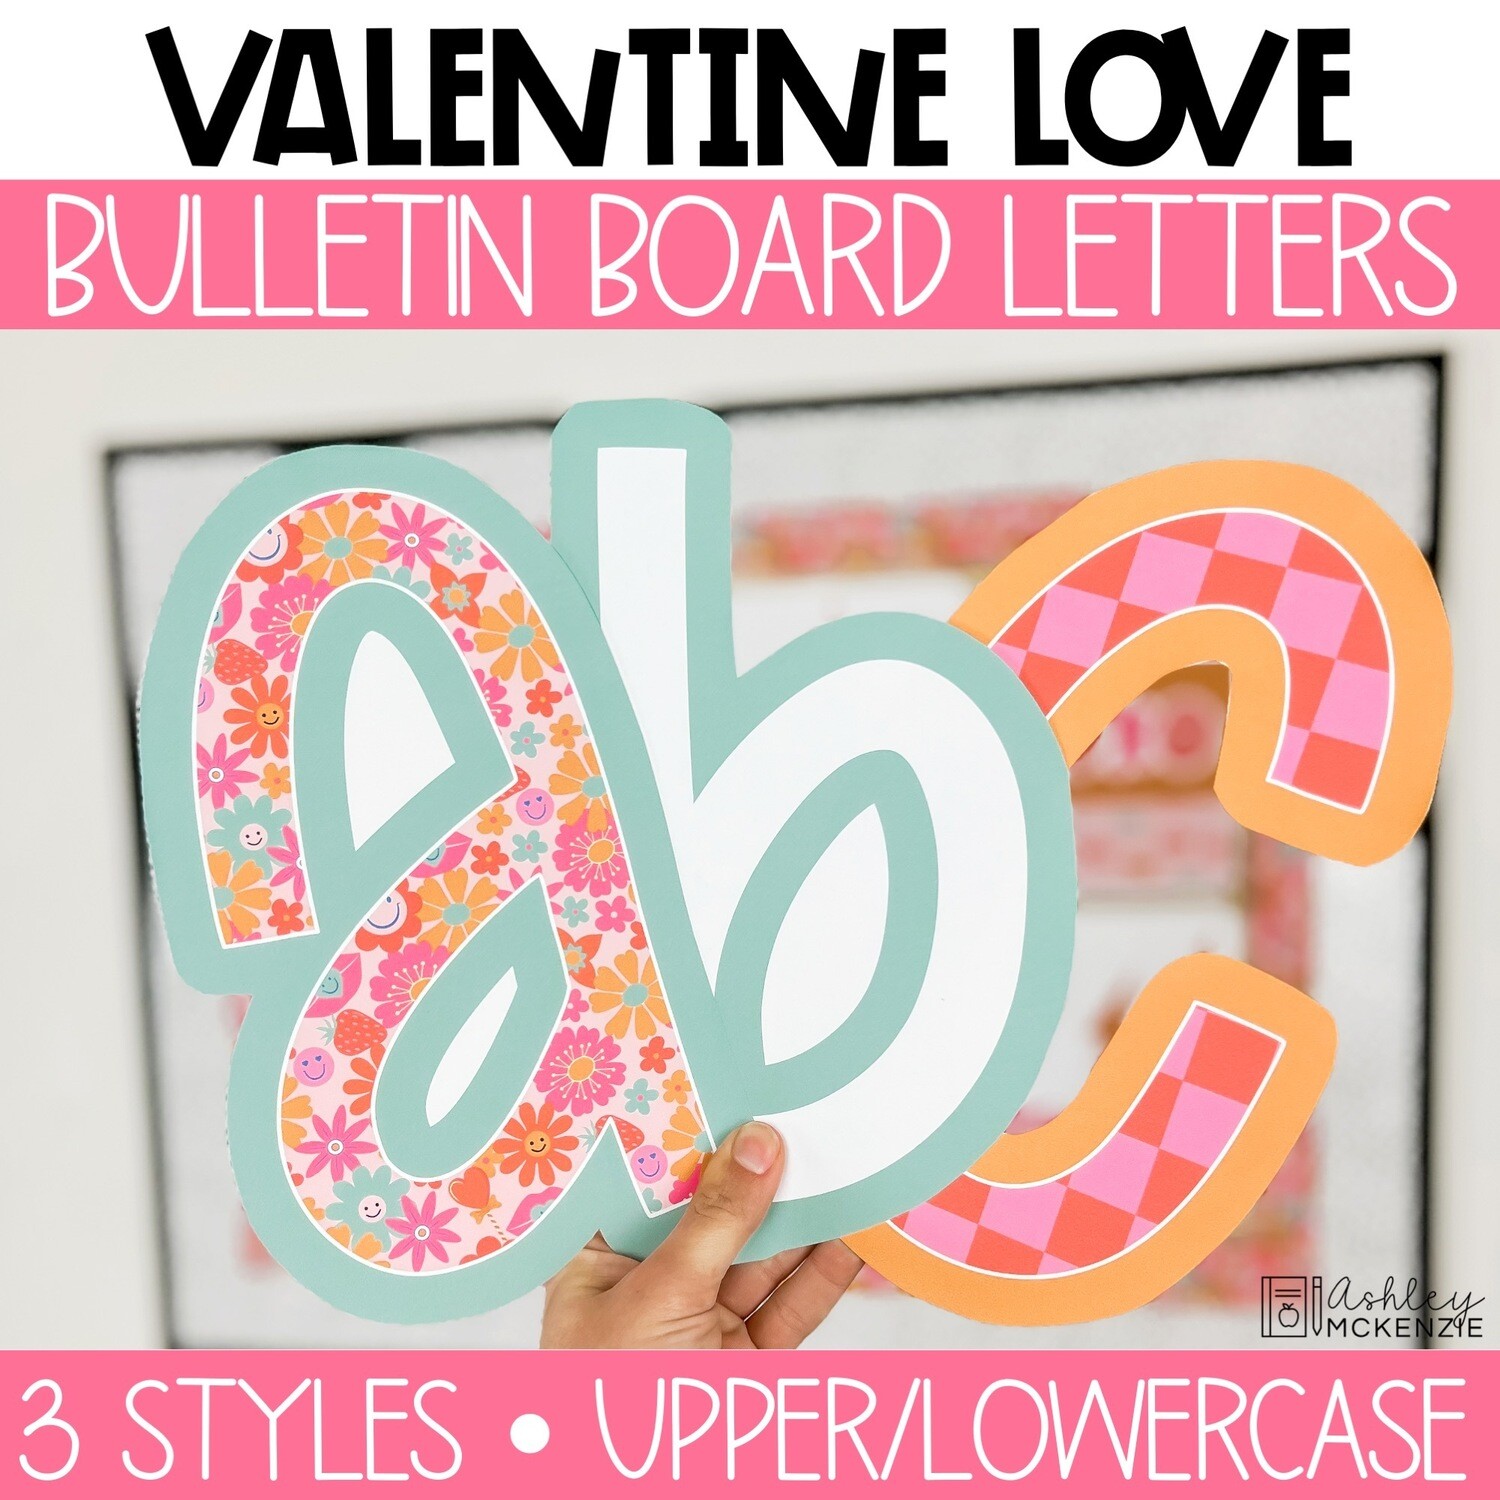 Valentine Love A-Z Bulletin Board Letters, Punctuation, and Numbers